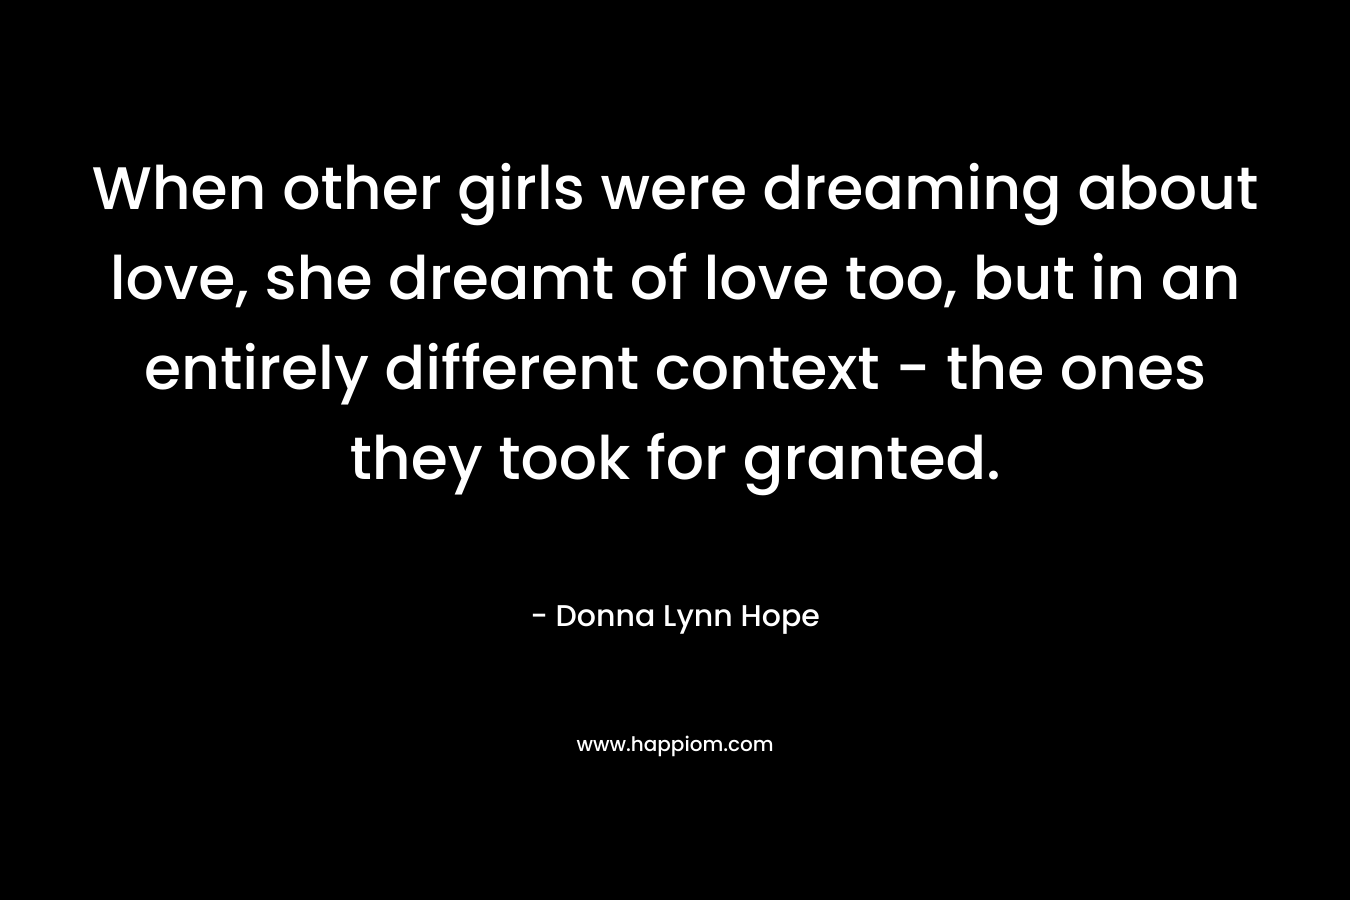 When other girls were dreaming about love, she dreamt of love too, but in an entirely different context - the ones they took for granted.